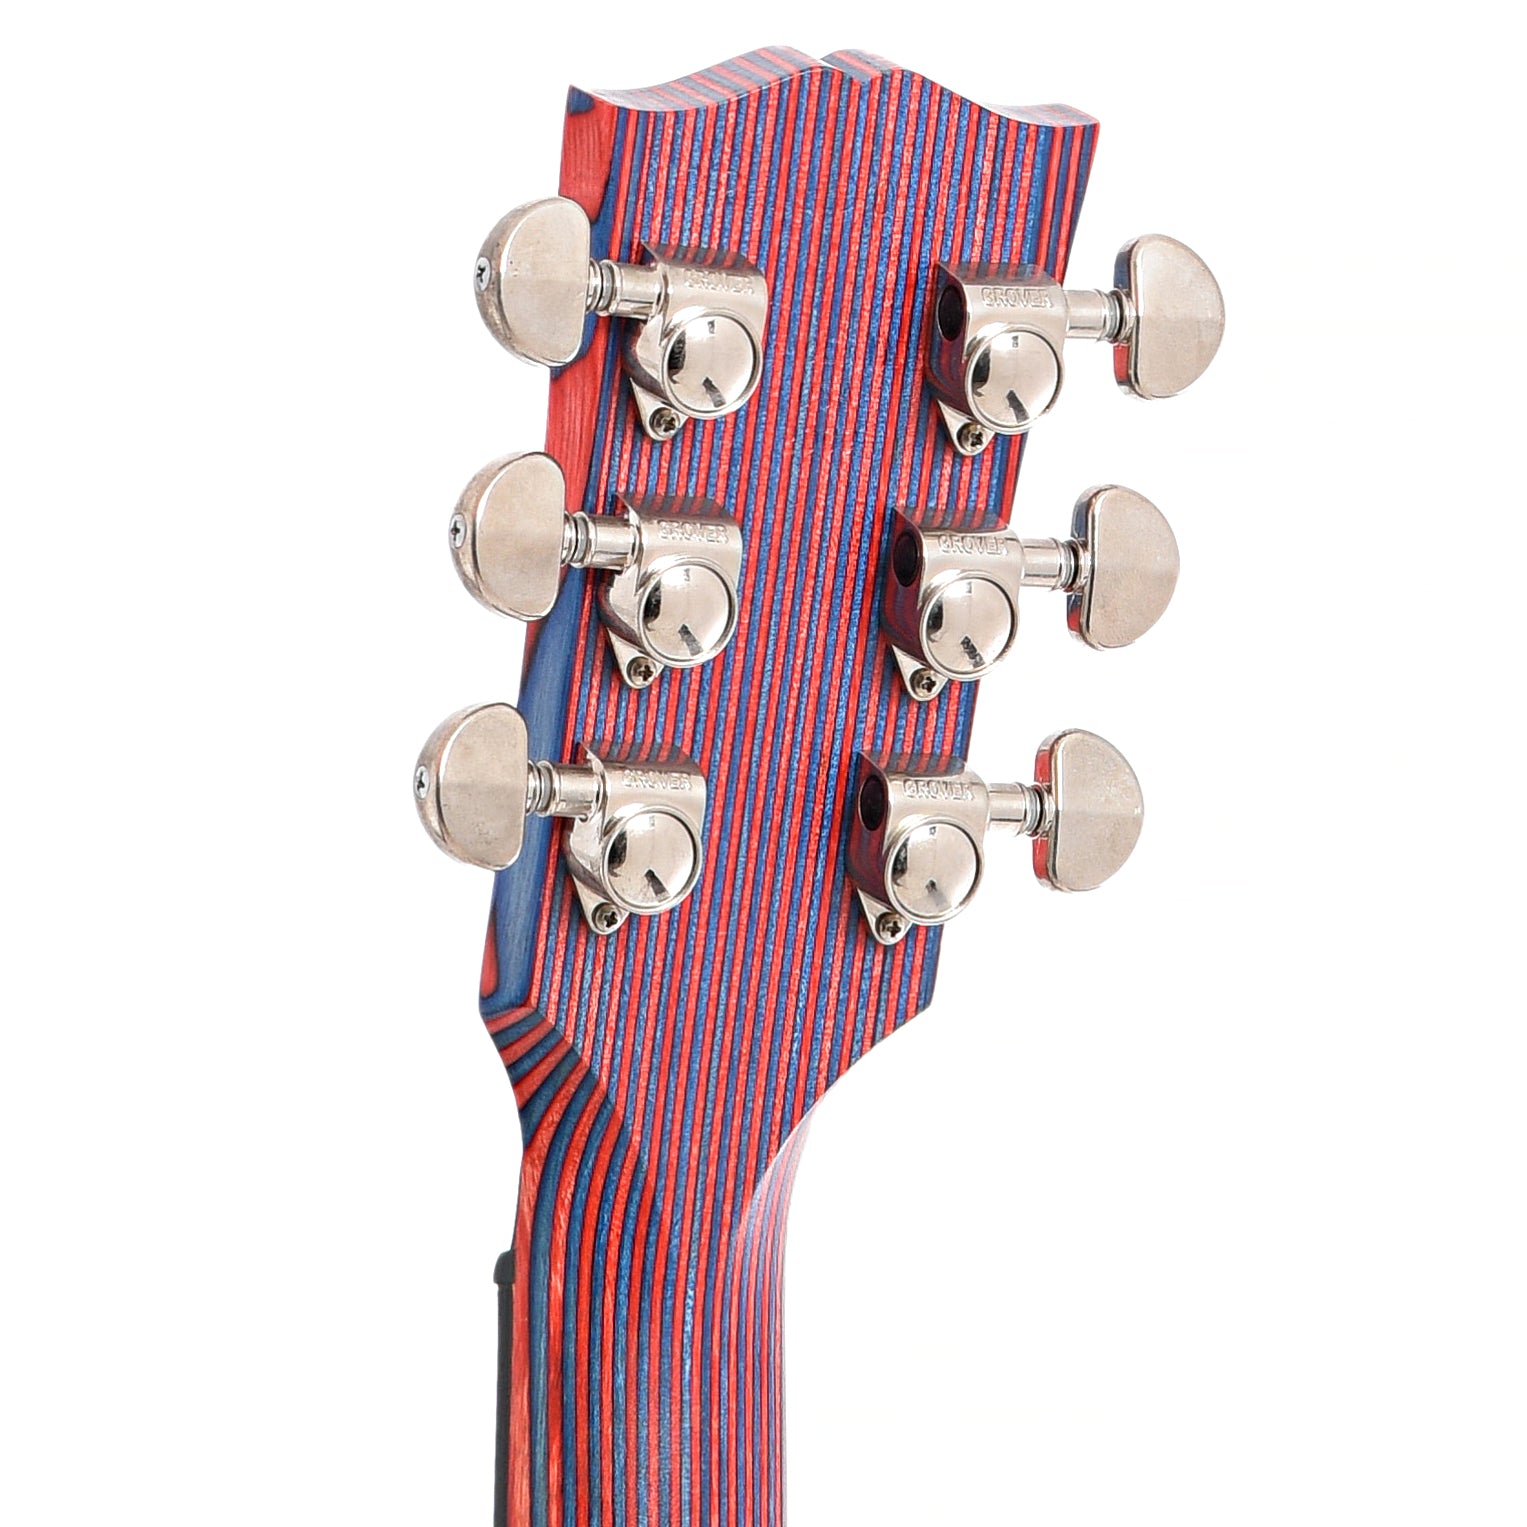 Back headstock of Gibson Zoot Suit SG Electric Guitar (2009)